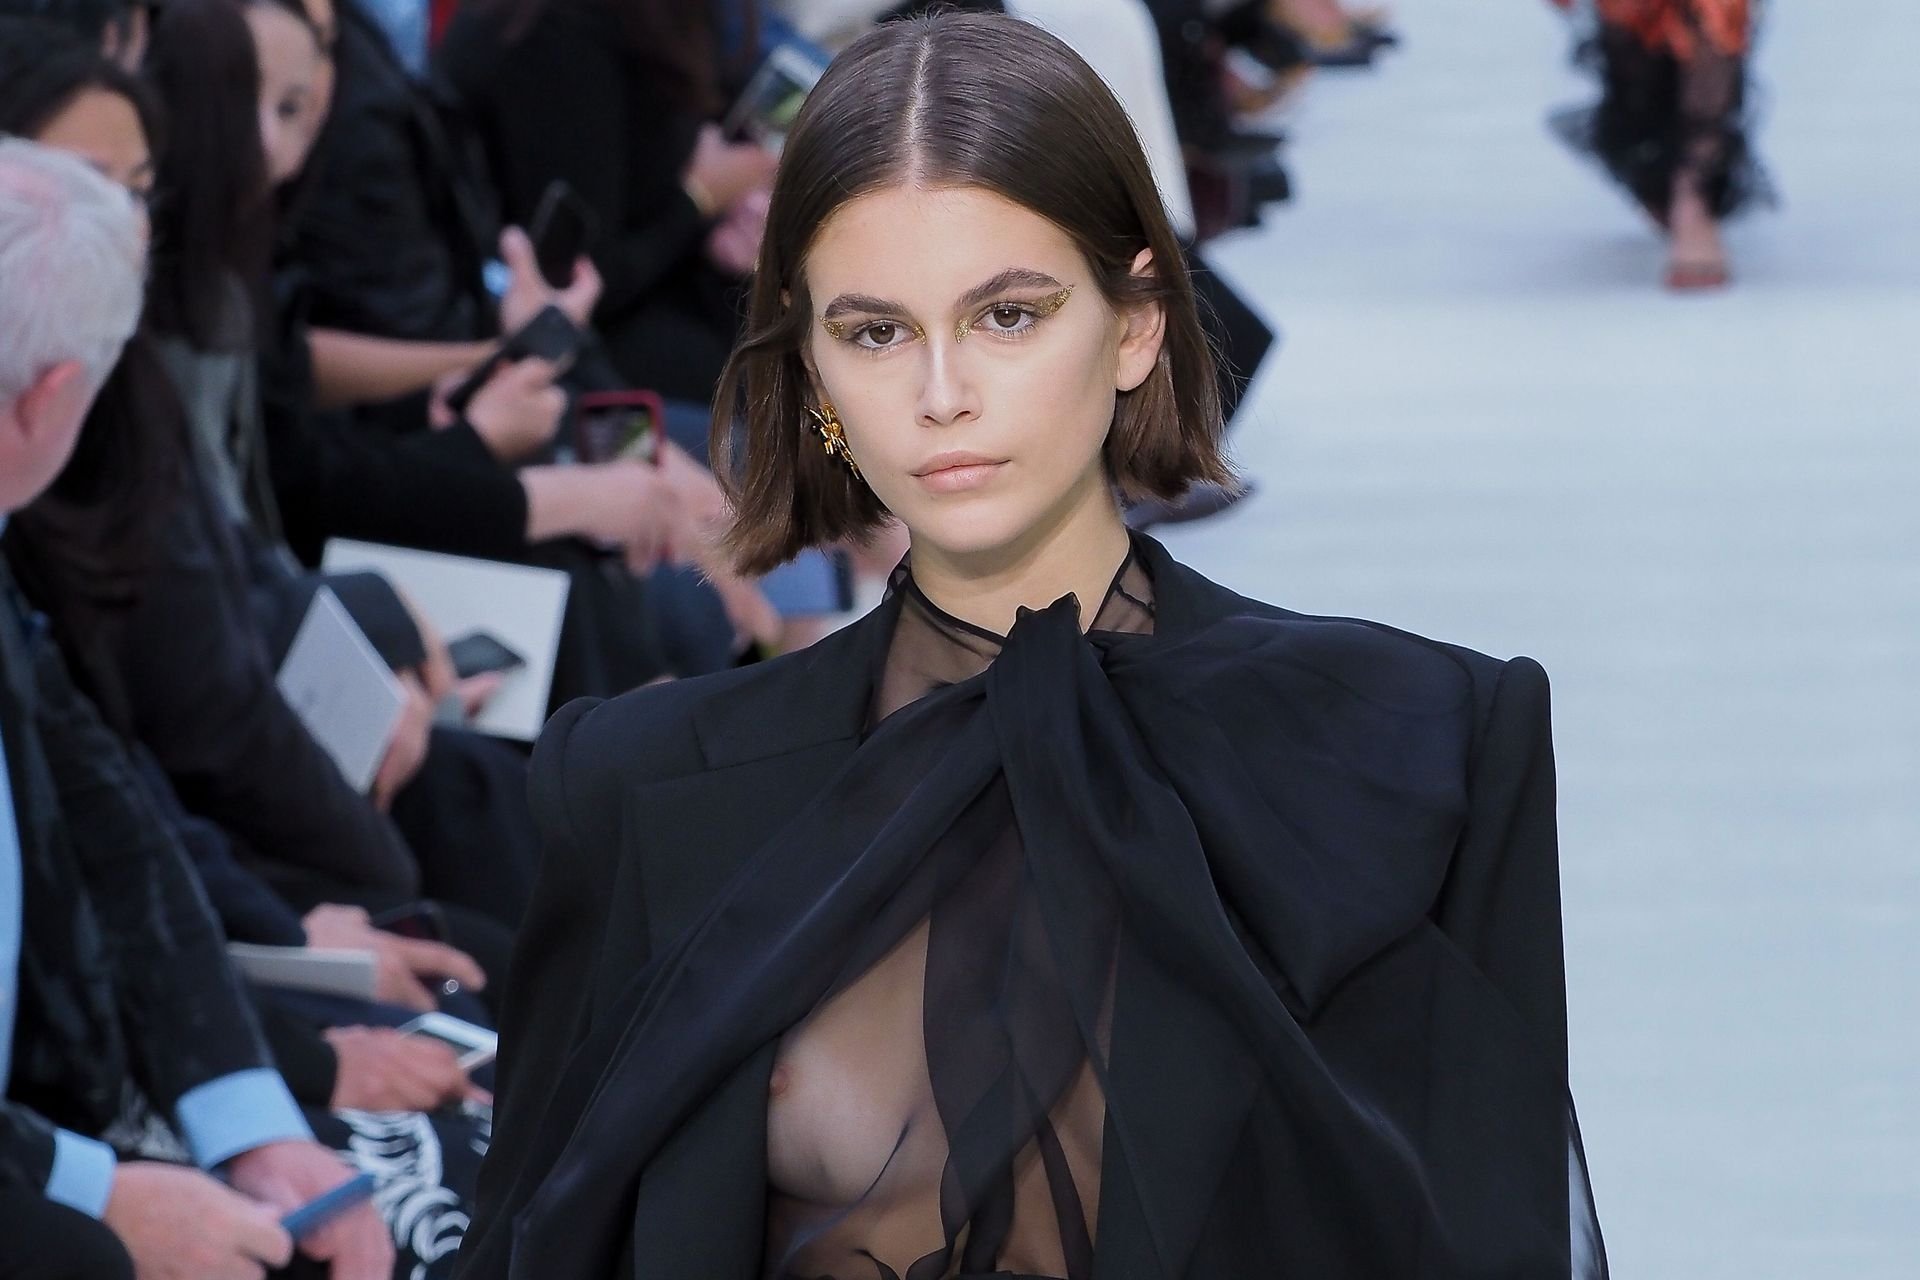 Model Kaia Gerber (18) walks the runway in a see-through blouse at the Vale...